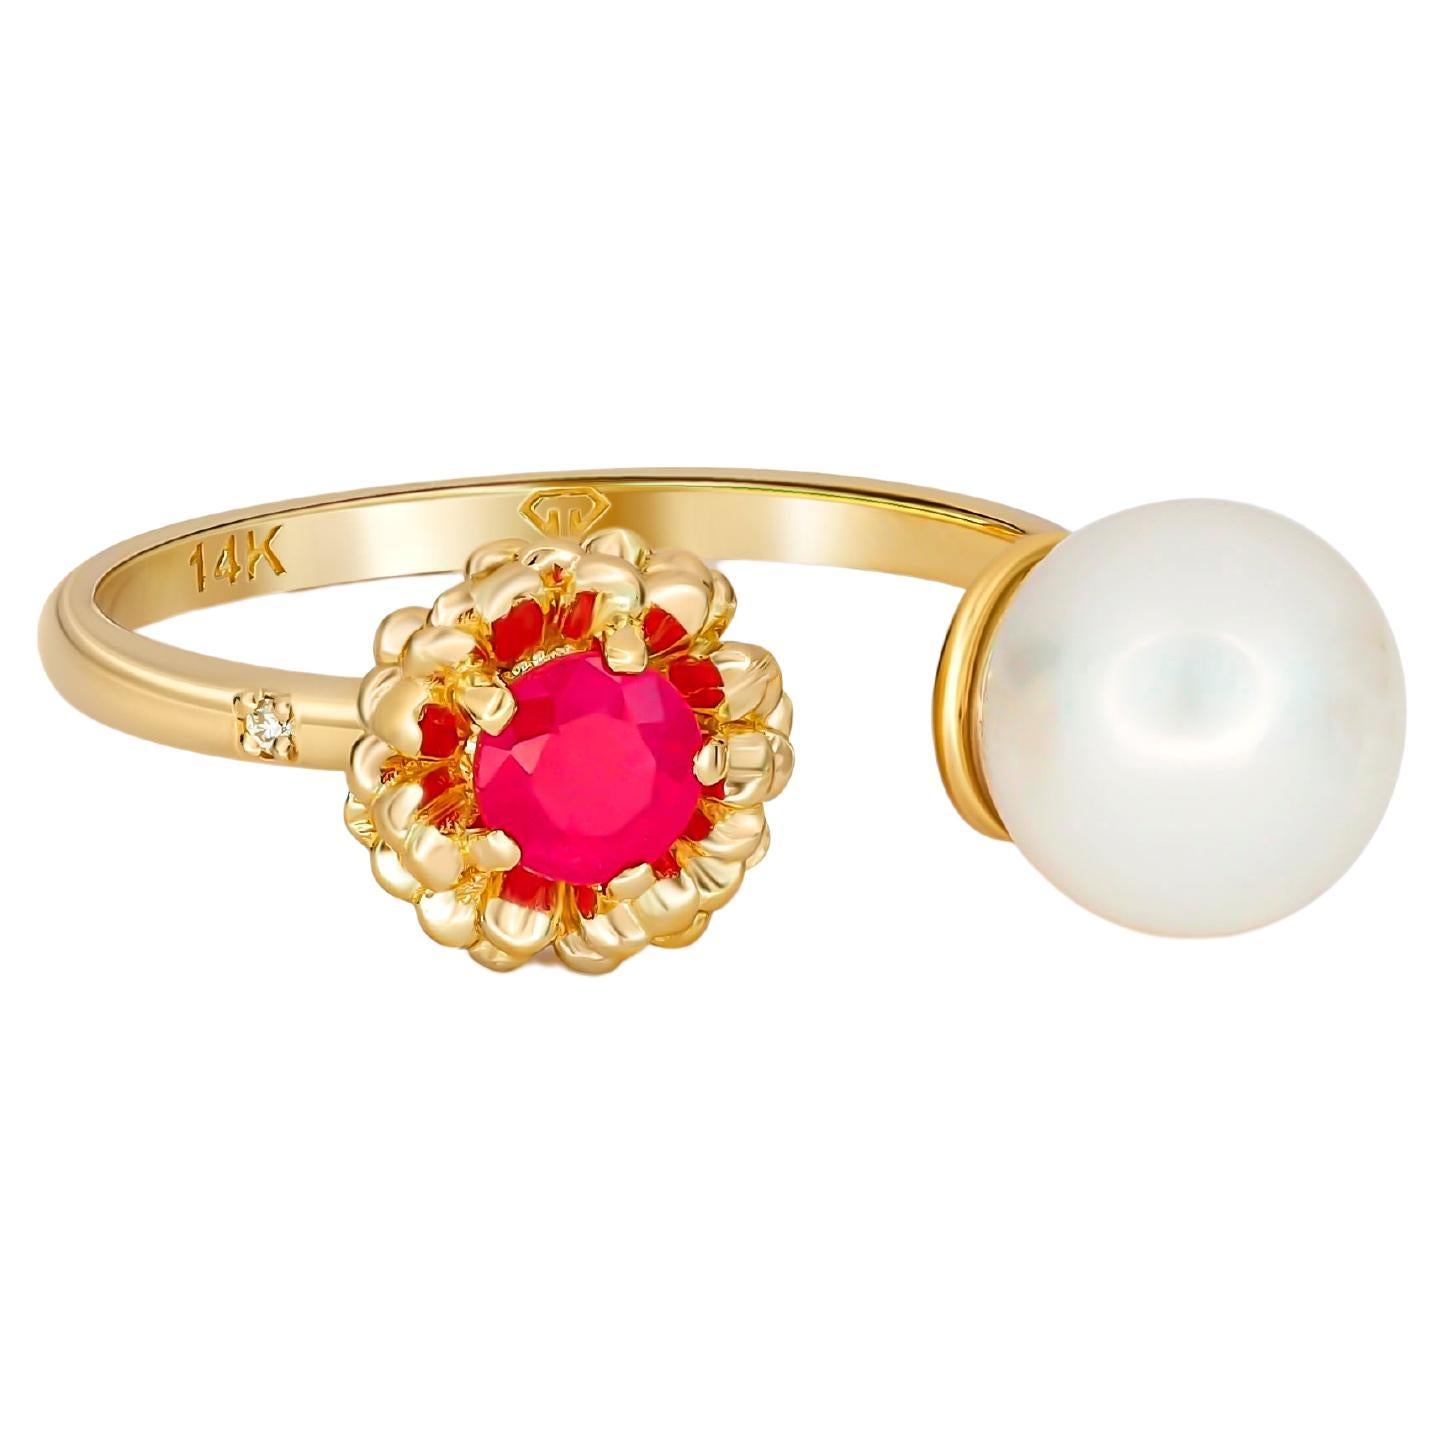 For Sale:  14k Gold Ring with Ruby, Pearl and Diamond, Flower Ring